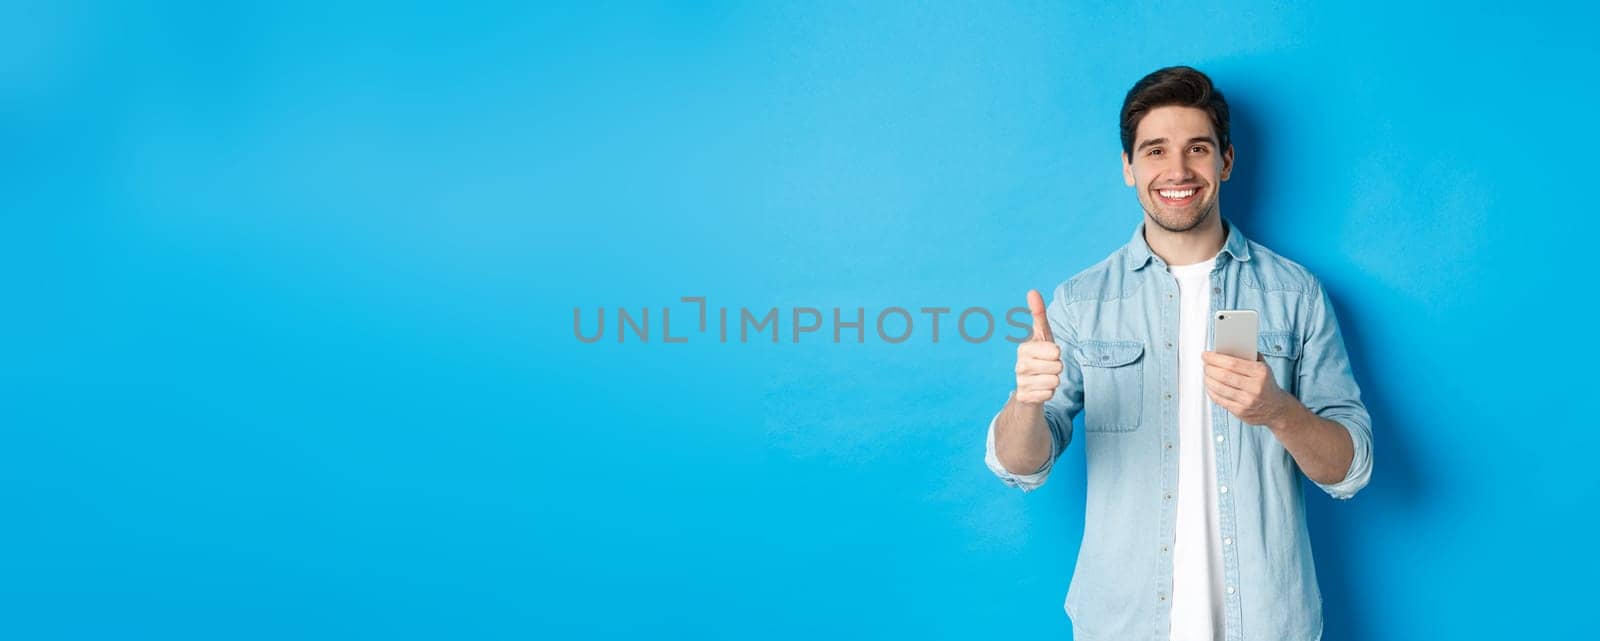 Concept of online shopping, applications and technology. Satisfied man in casual clothes smiling, showing thumbs up after using smartphone app, standing over blue background.